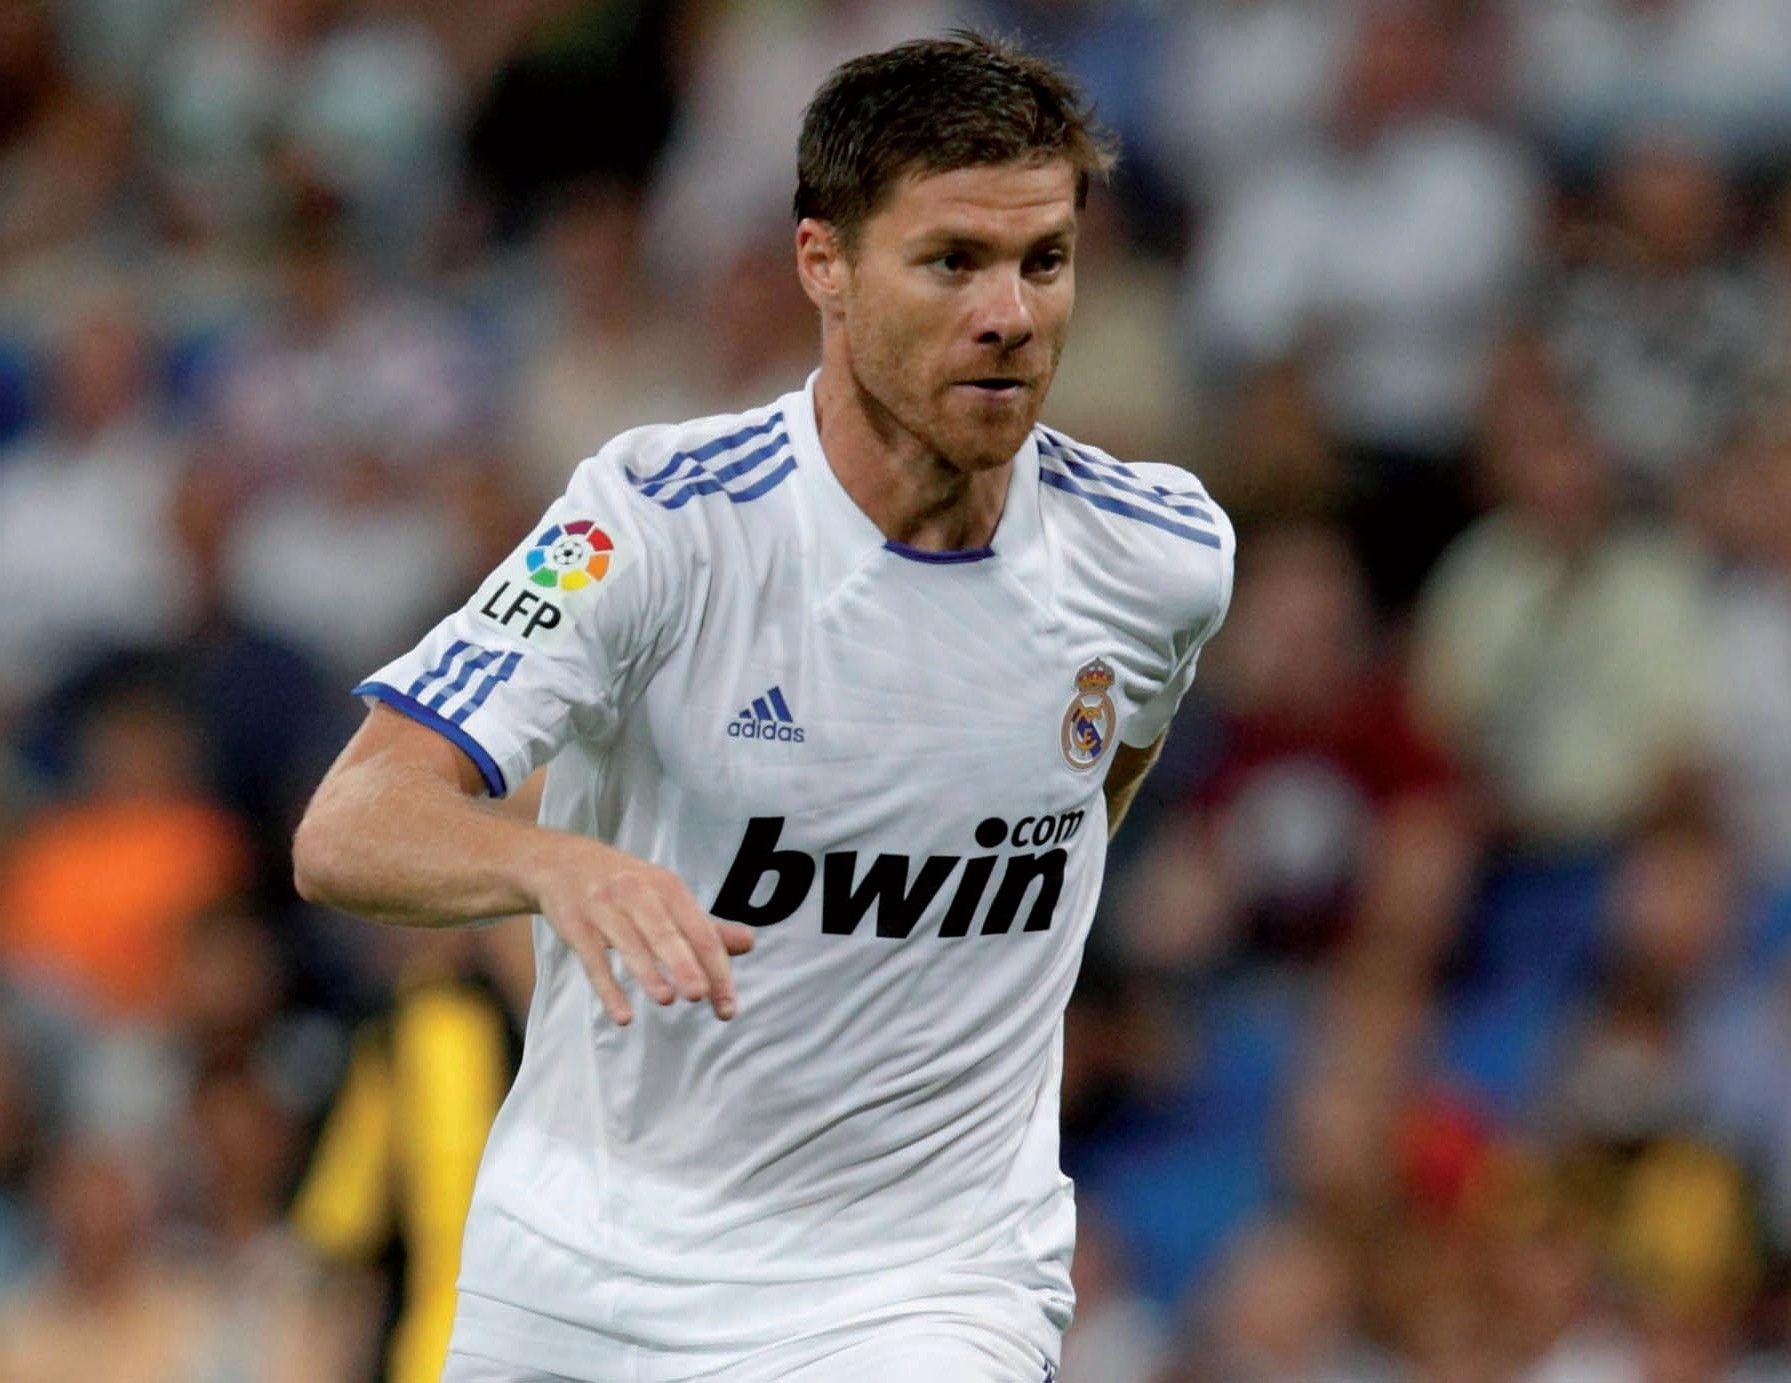  Xabi Alonso in action during his time playing for Real Madrid.